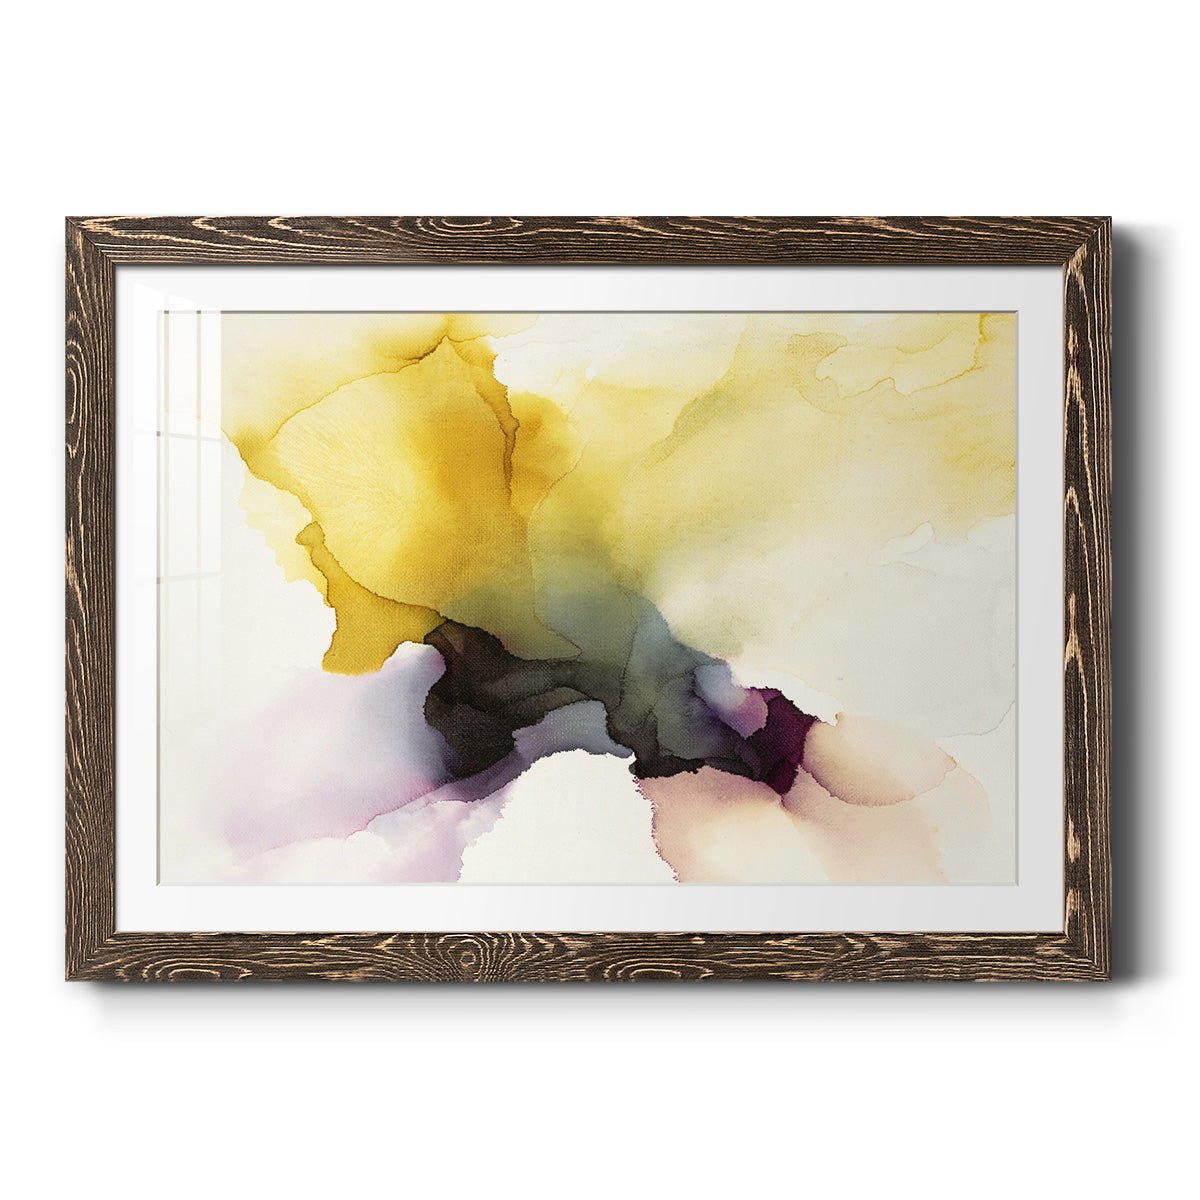 Never Have I Laid Eyes on Equal Beauty in Man or Woman-Premium Framed Print - Ready to Hang